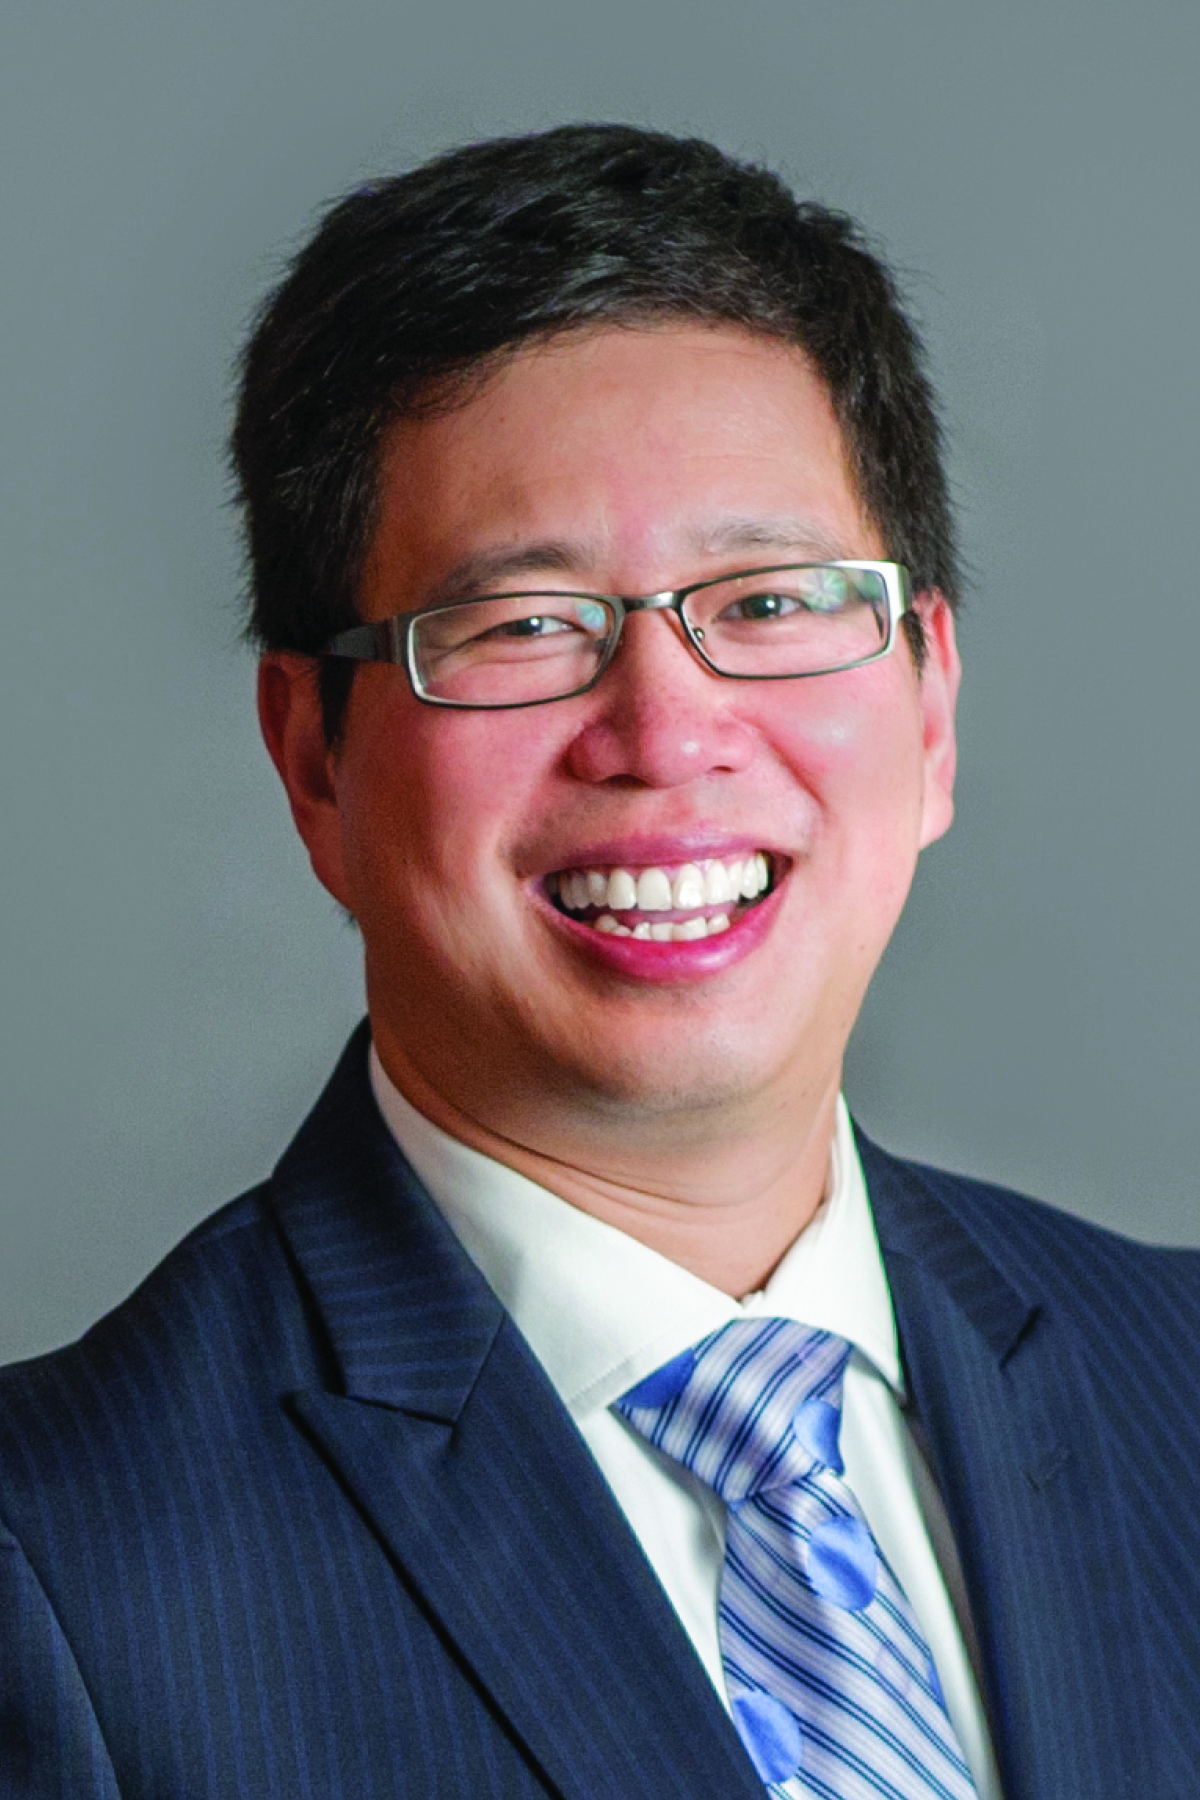 Level Chan says a lack of women and racialized lawyers at the top of law firms is a matter of retention and advancement. He says there continues to be “over-representation” at the associate and entry-level areas of the firms but they don’t tend to stay.